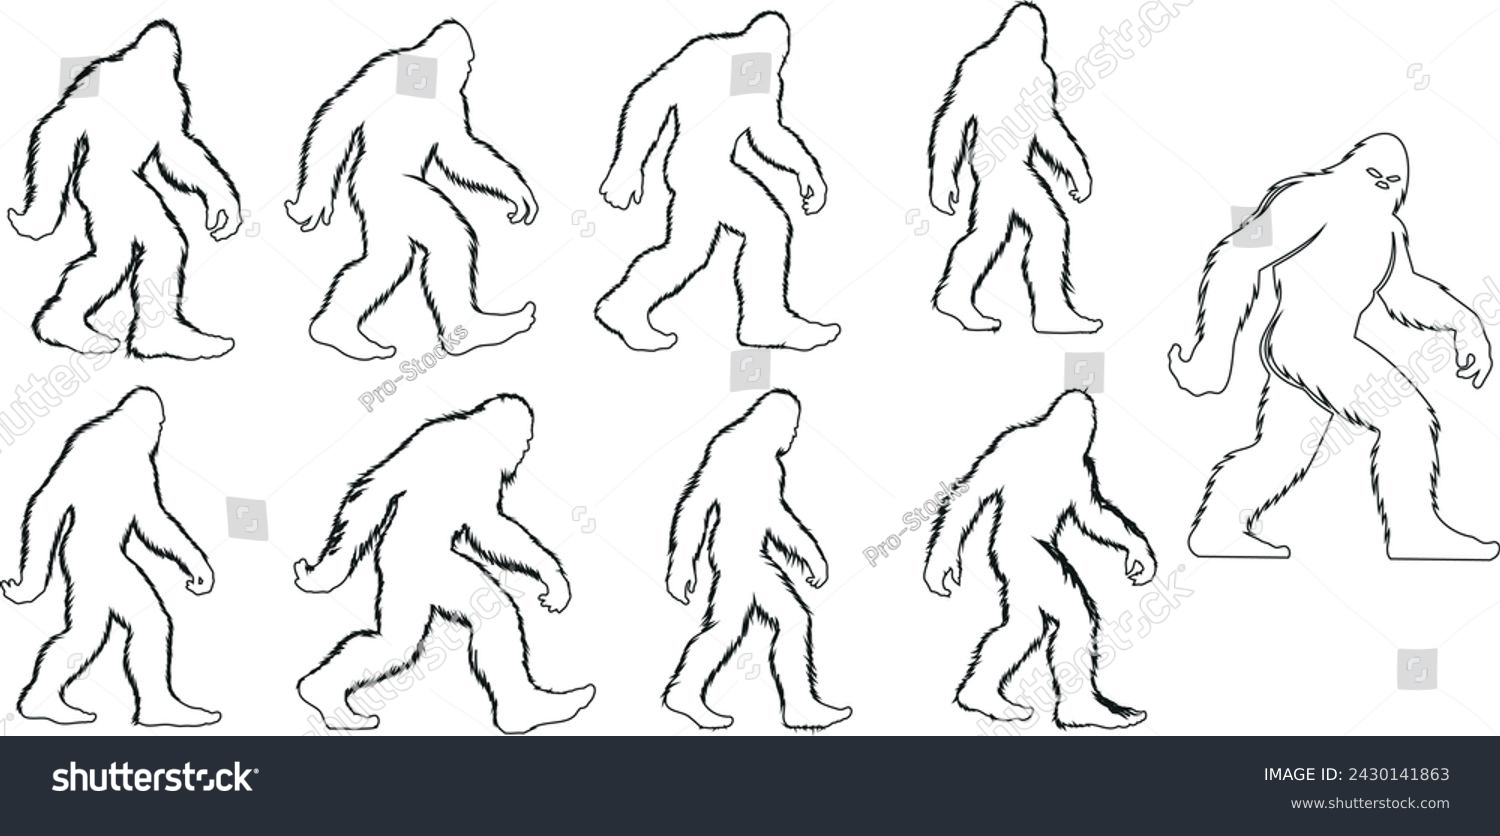 SVG of Bigfoot line art, mythical creature illustration, perfect for cryptology, mystery themes, and wilderness exploration. Captures the enigmatic Bigfoot in motion, ideal for engaging content svg